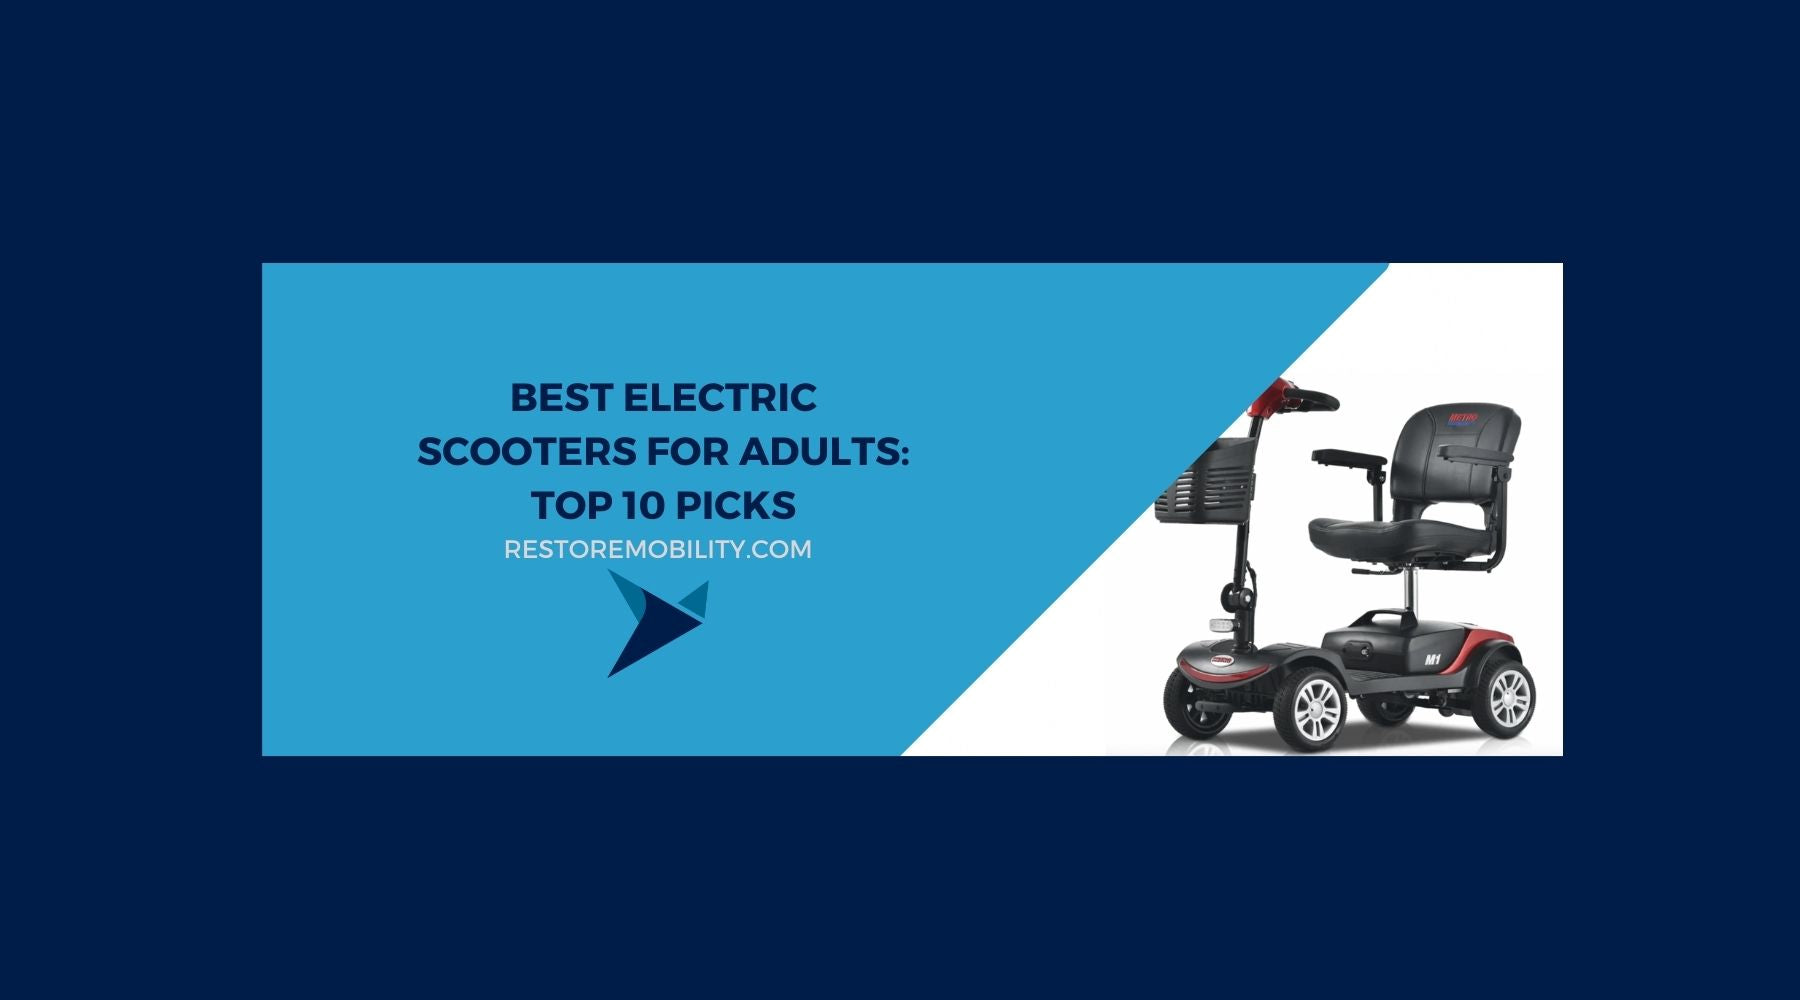 Best Electric Scooters for Adults: Top 10 Picks